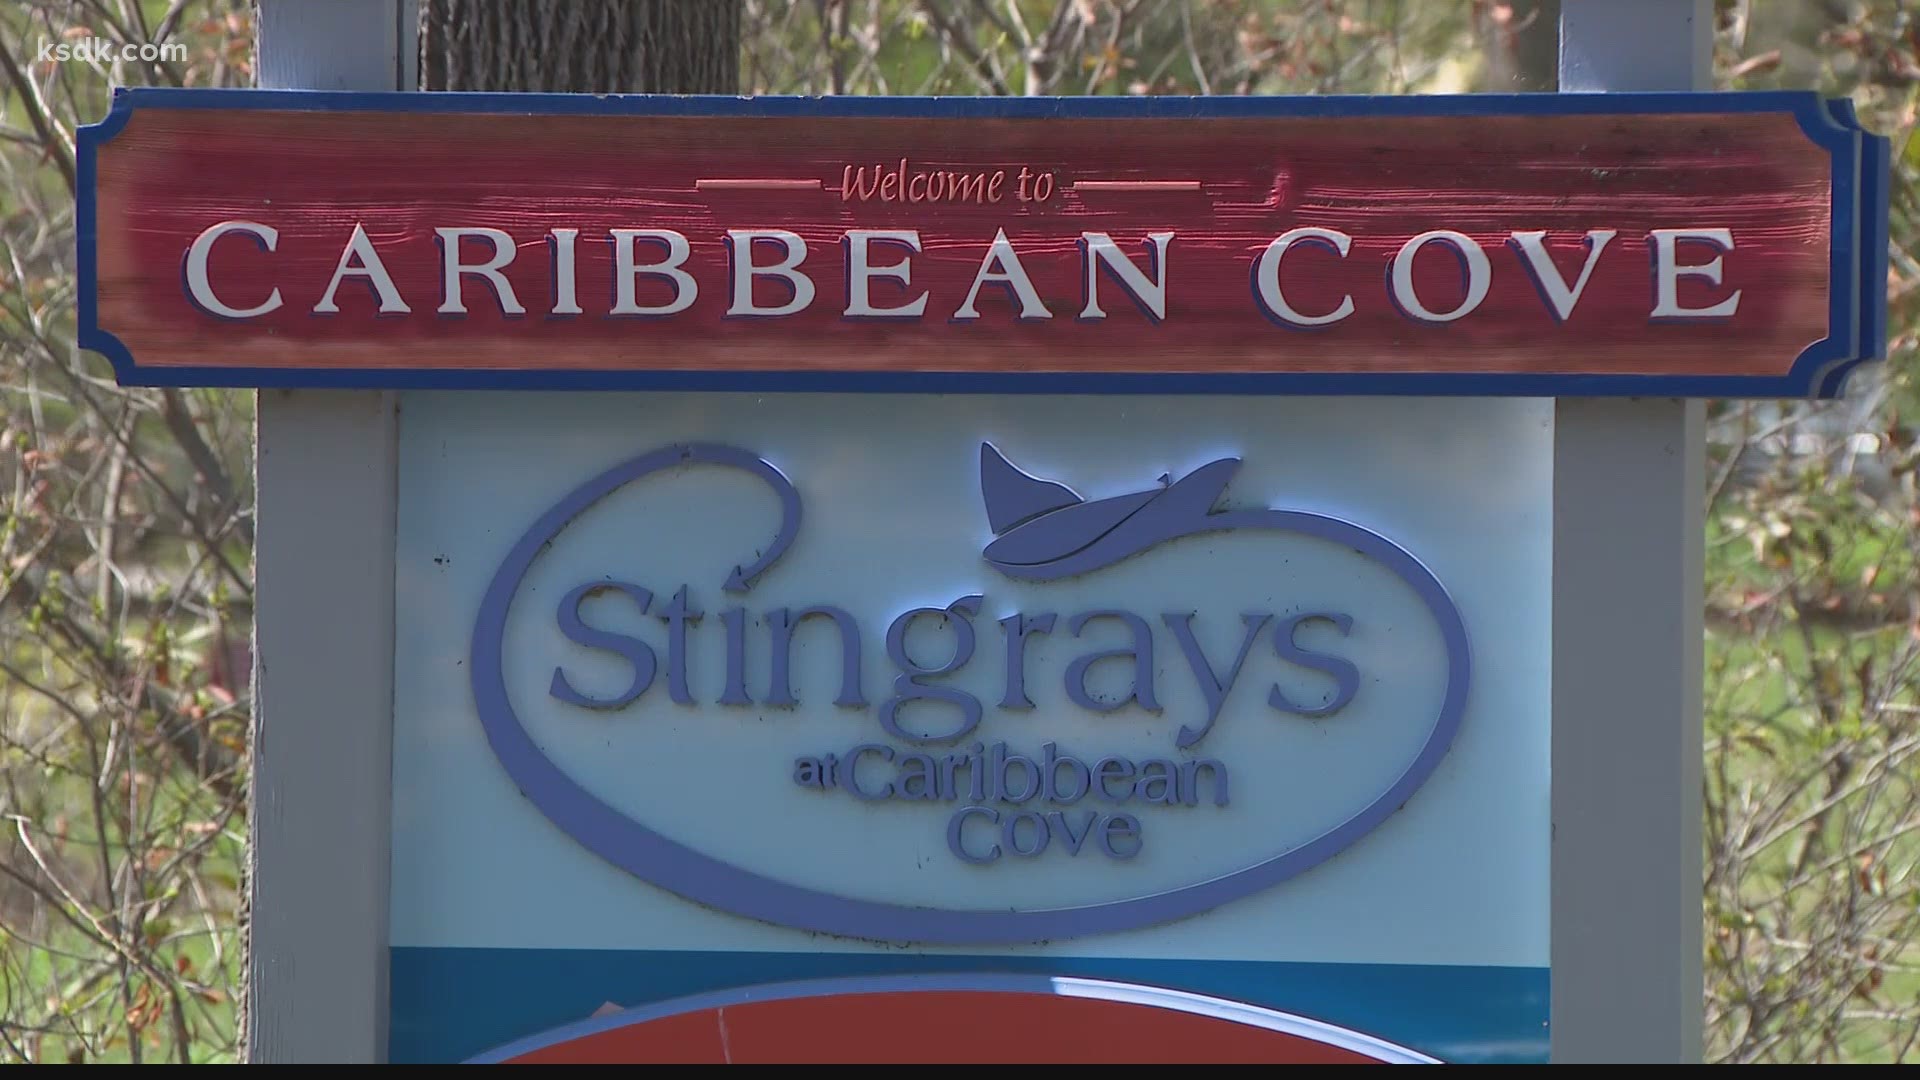 Stingrays at Caribbean Cove presented by SSM Health is open now through October 3.